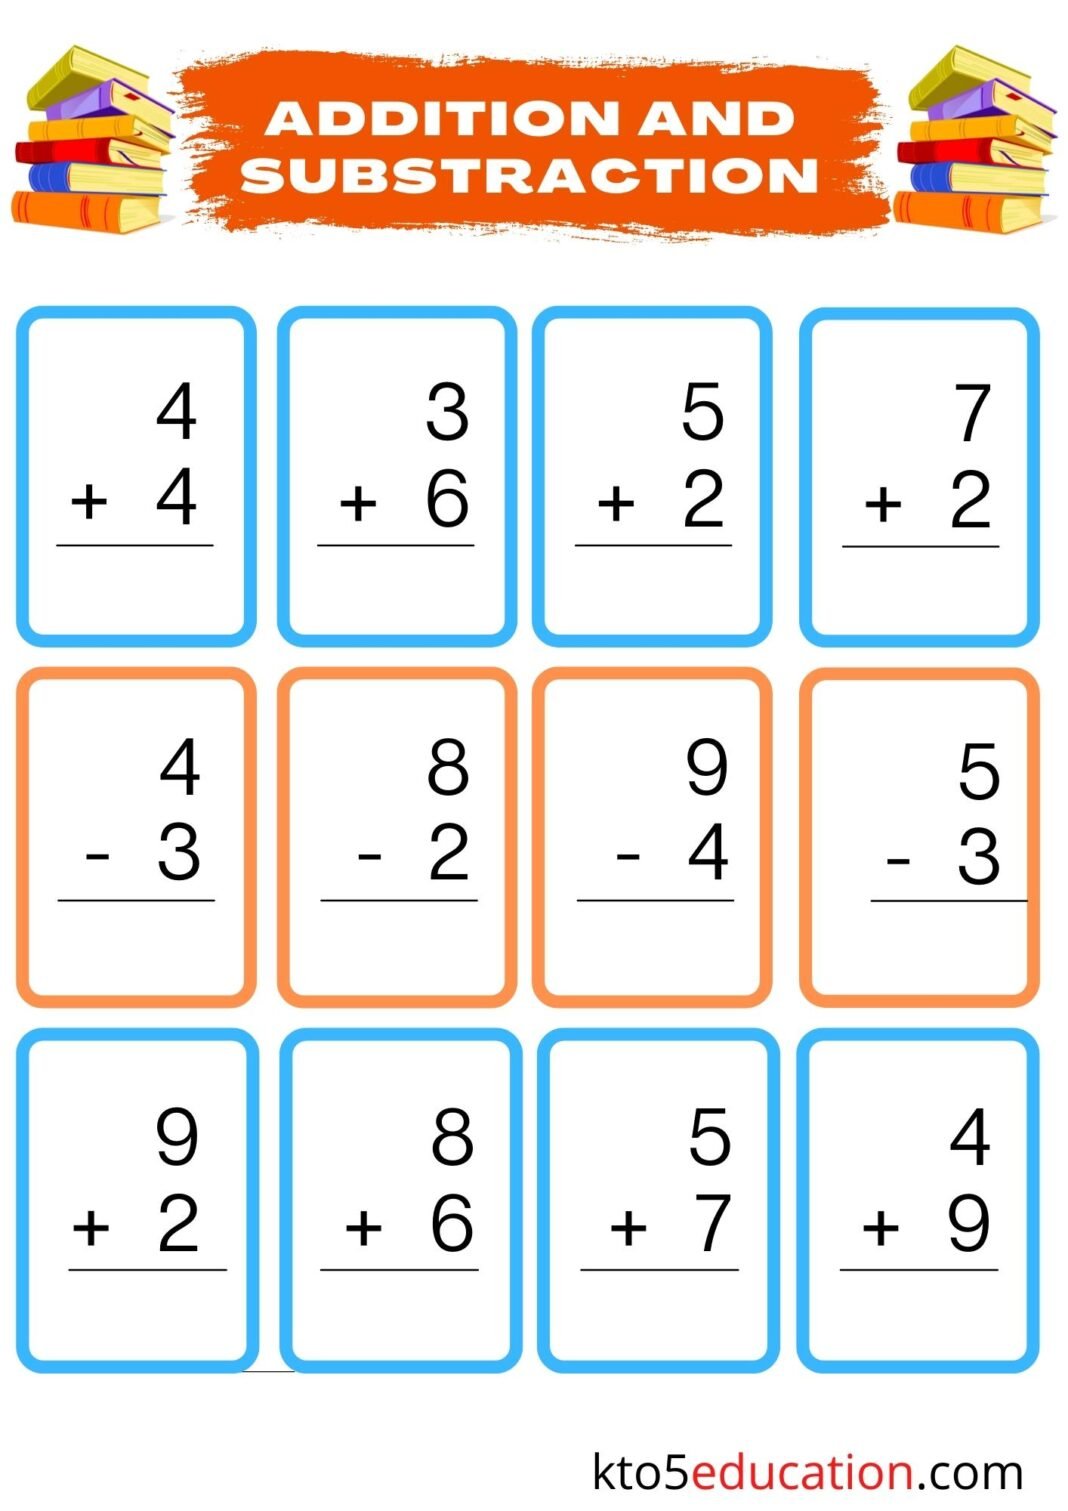 addition and subtraction worksheets education com